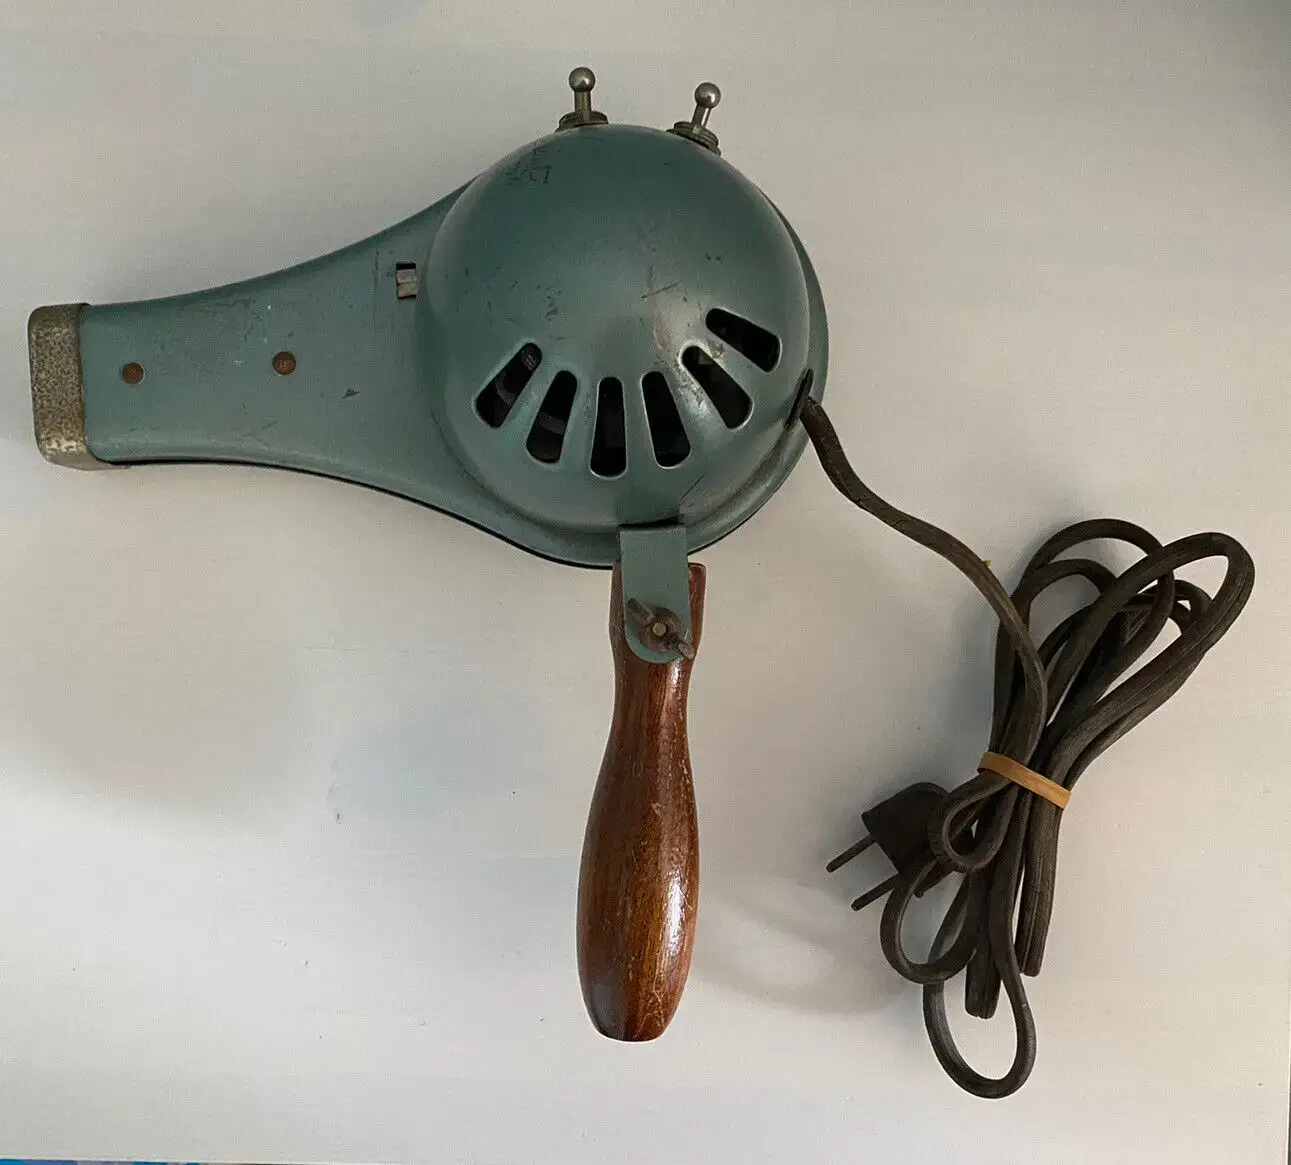 Vintage hair dryer with wooden handle and flexible cord.